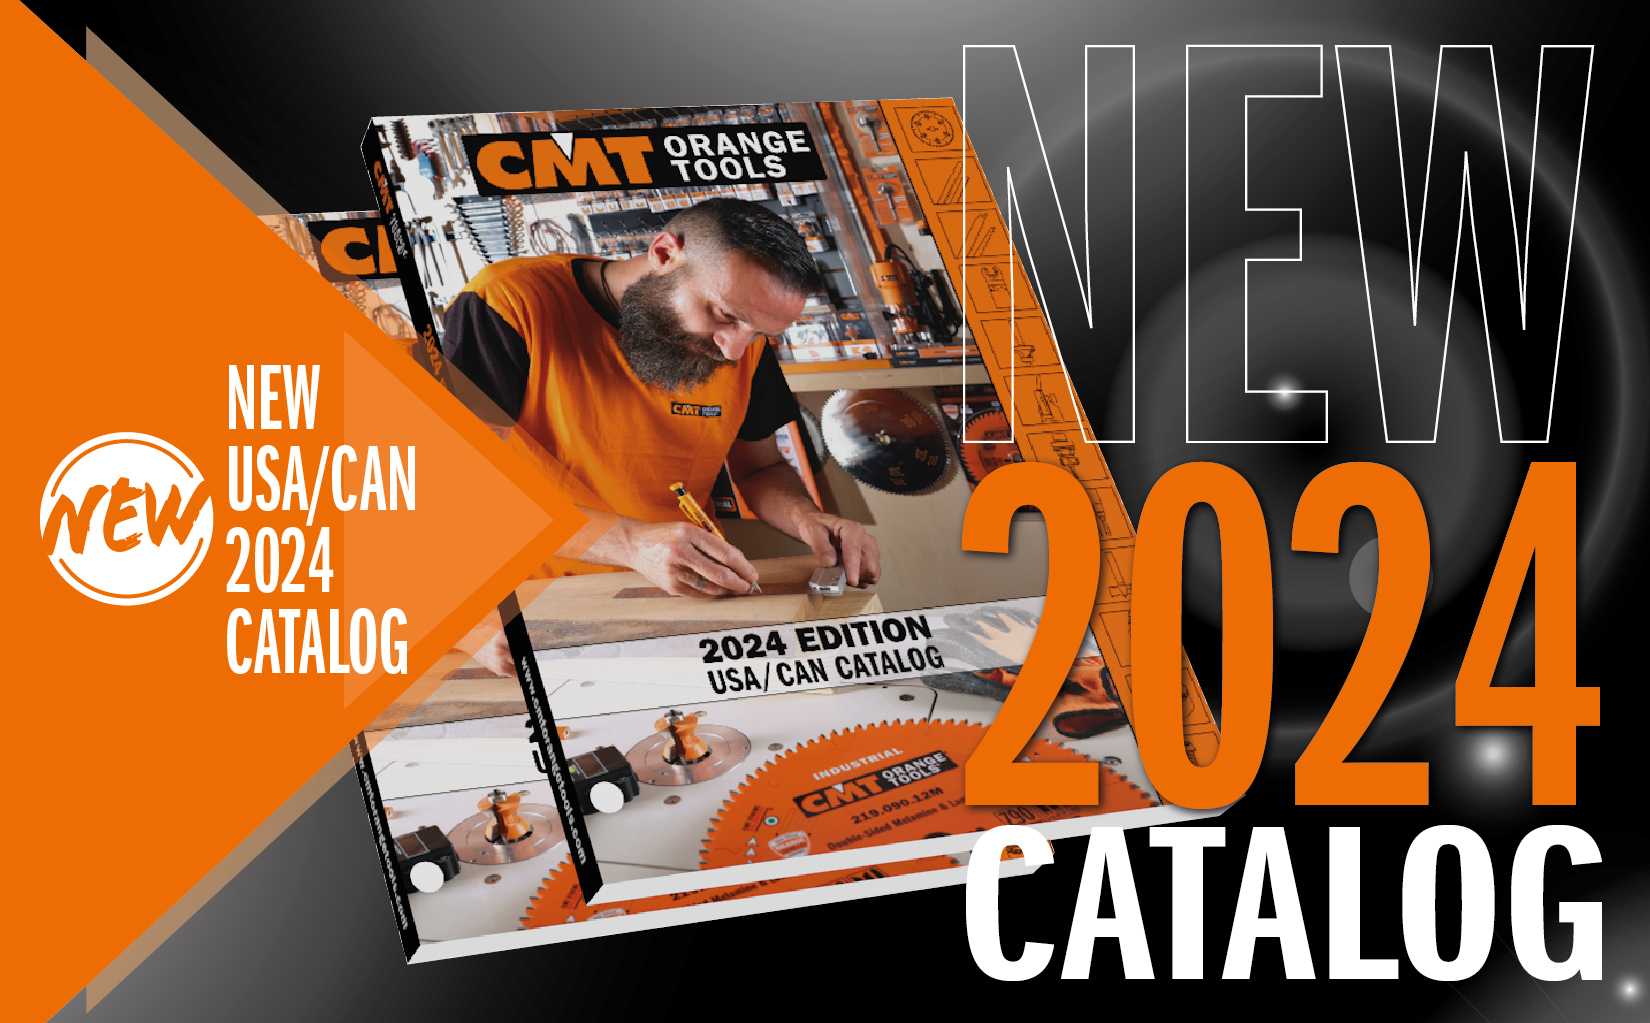 New 2024 USA/CAN Catalogue. Download NOW!